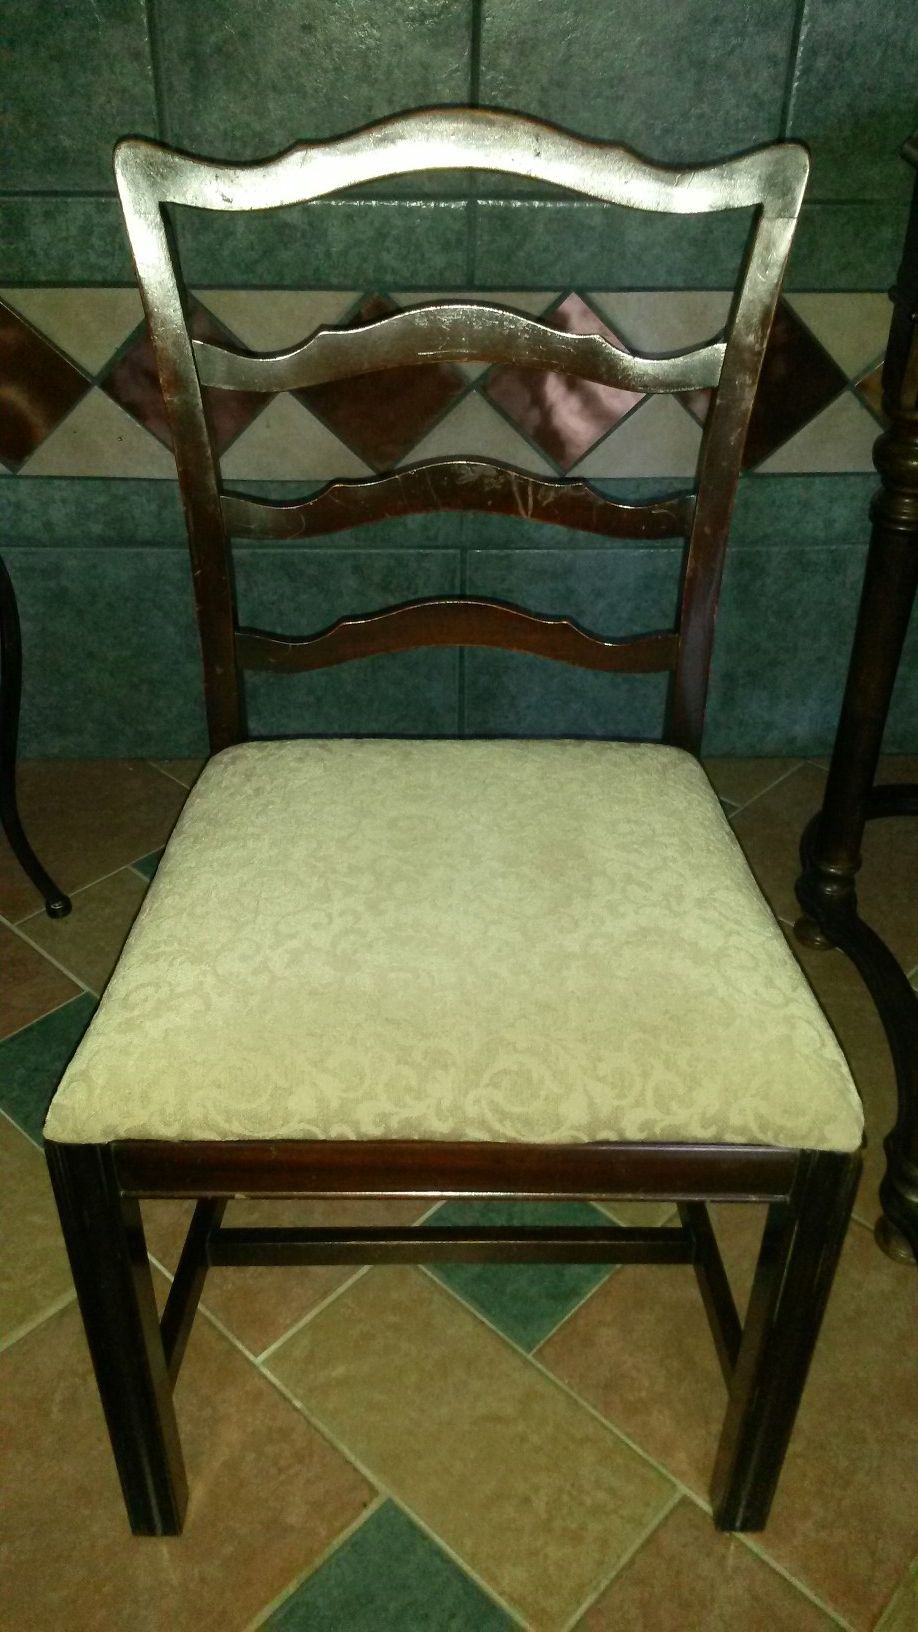 4 solid cherry wood antique chairs